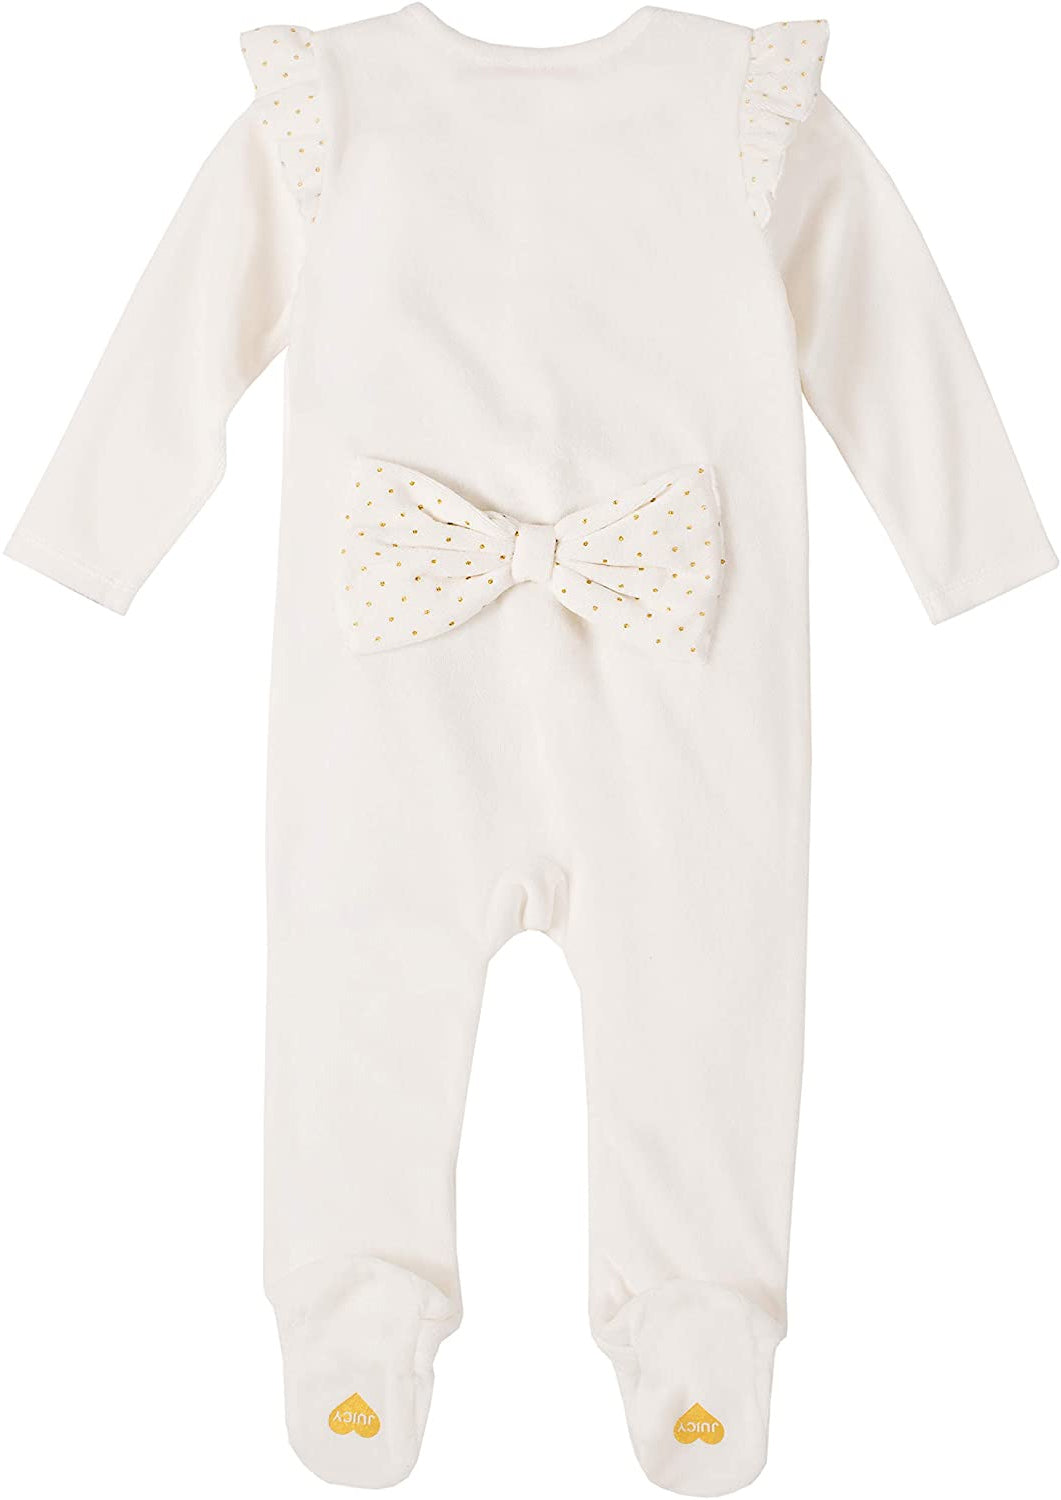 Juicy Couture Girls 0-9 Months Bow Velour Sleep and Play